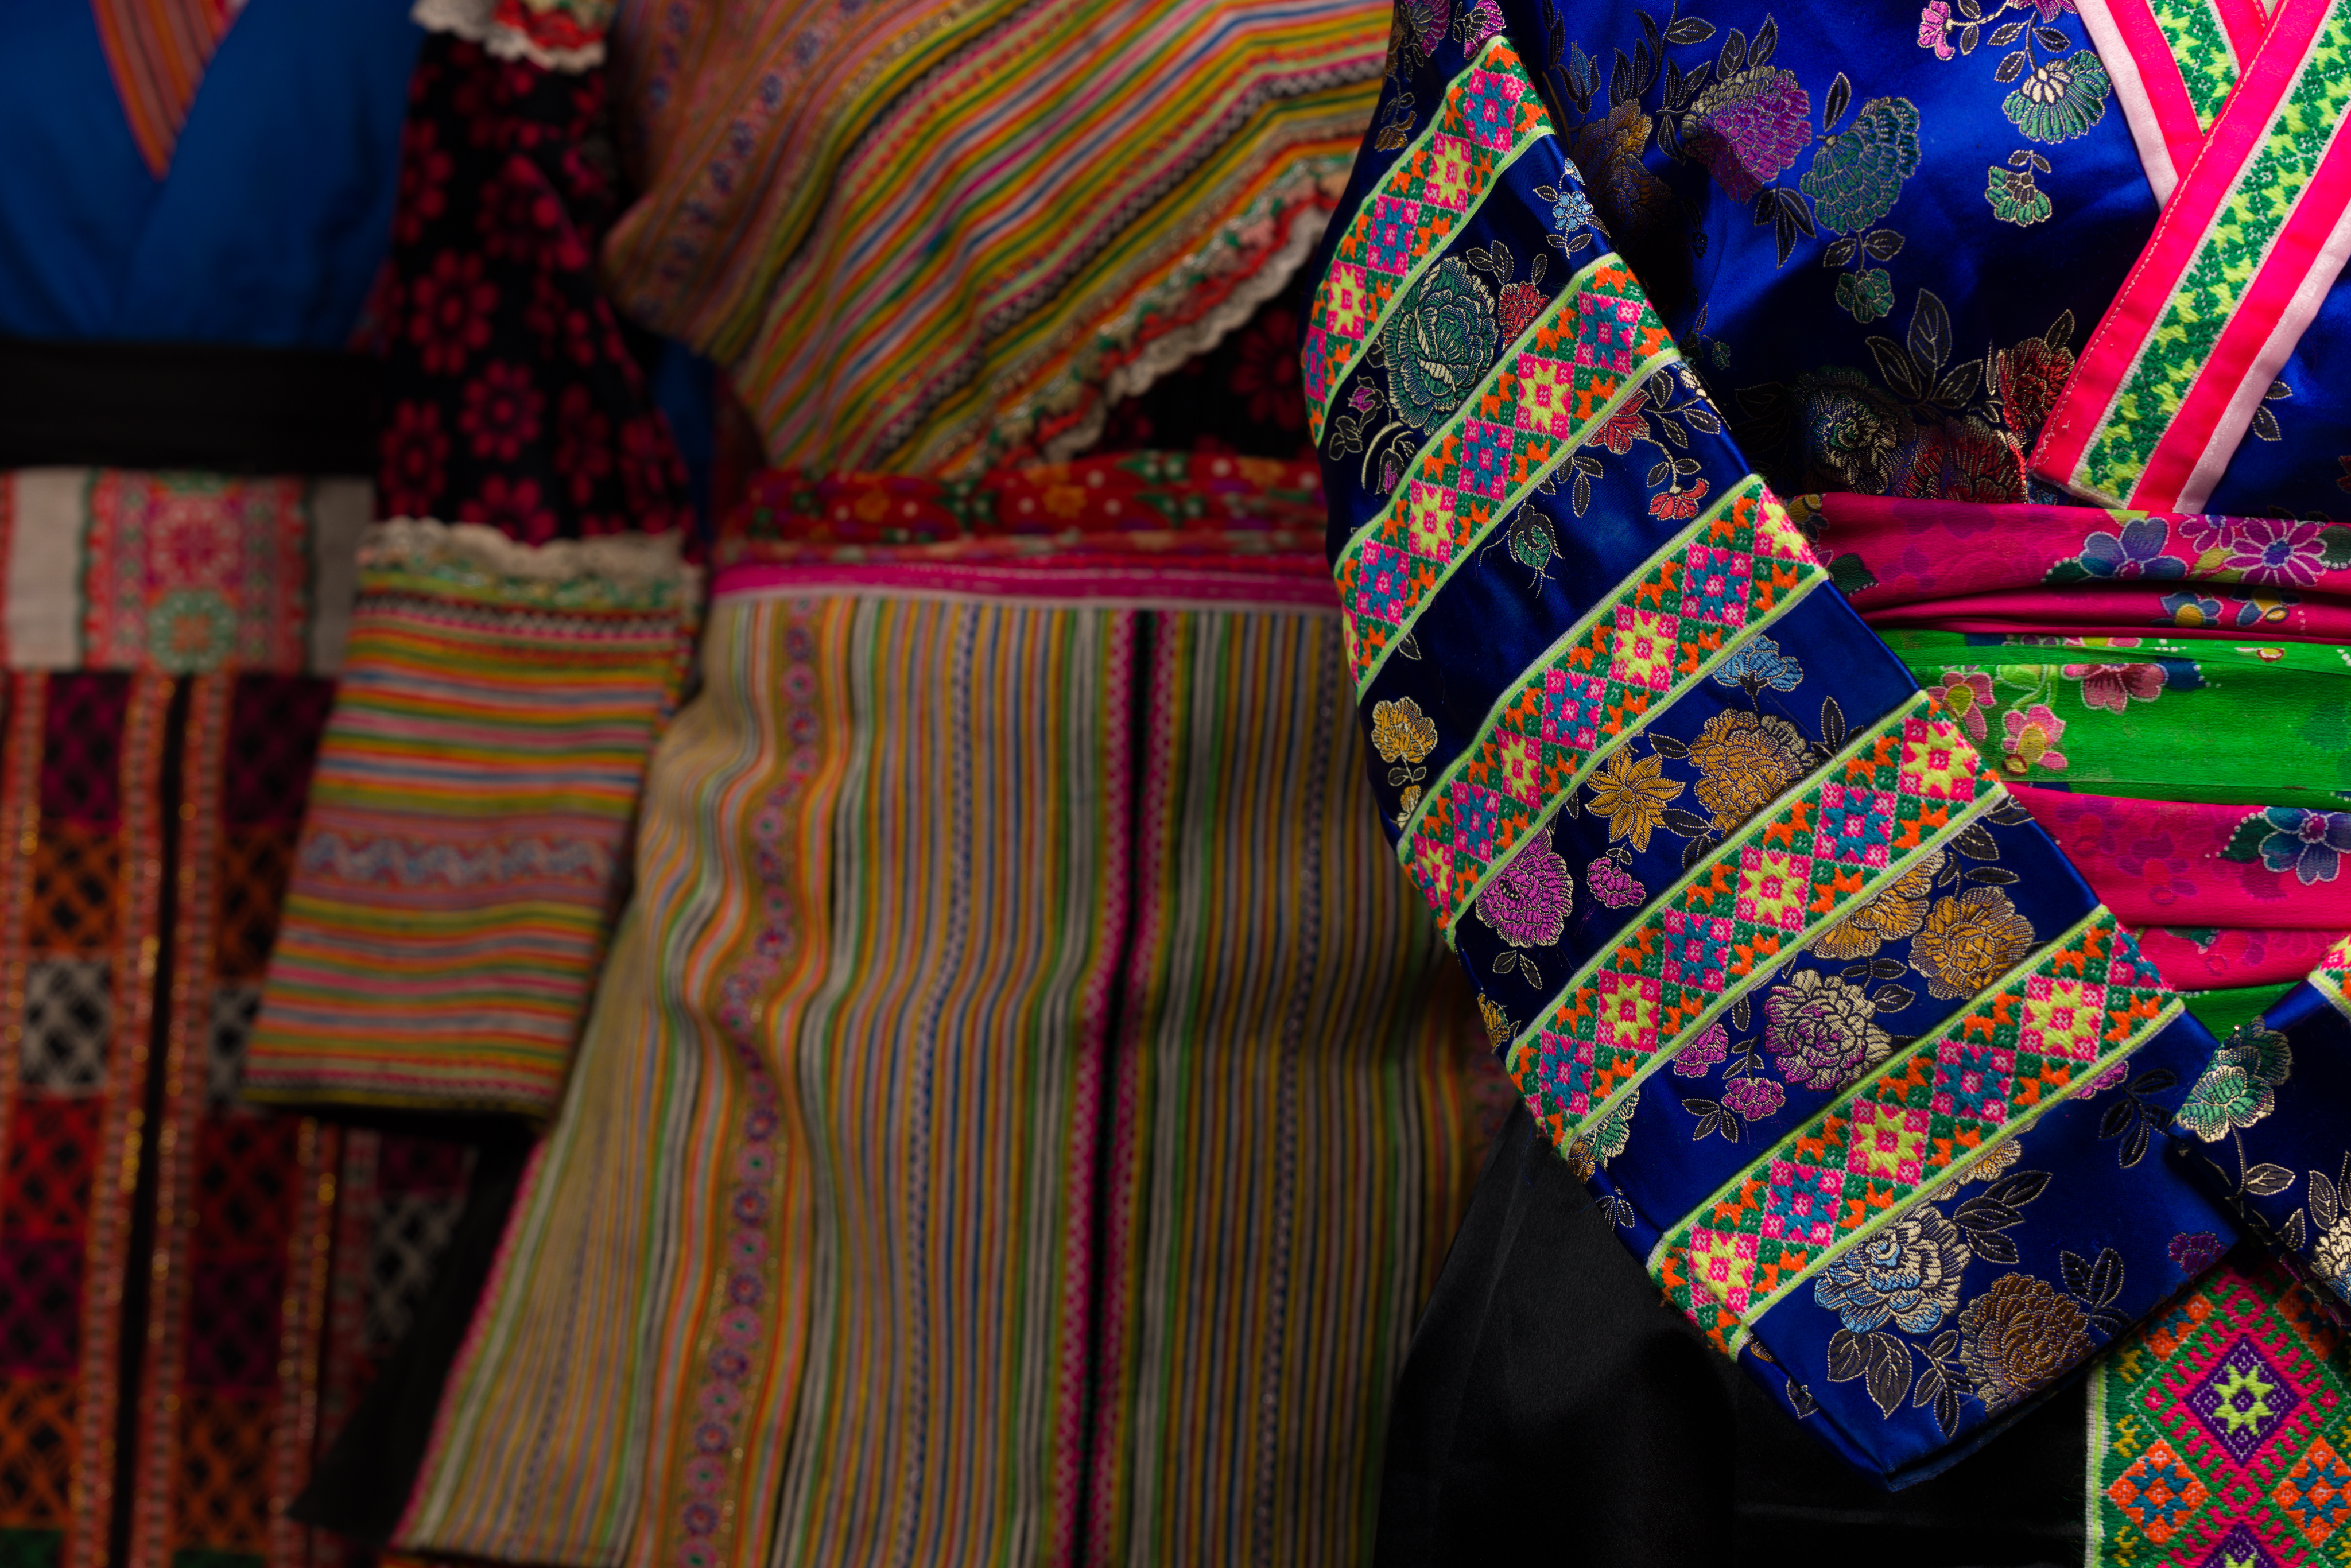 detail of Hmong costumes